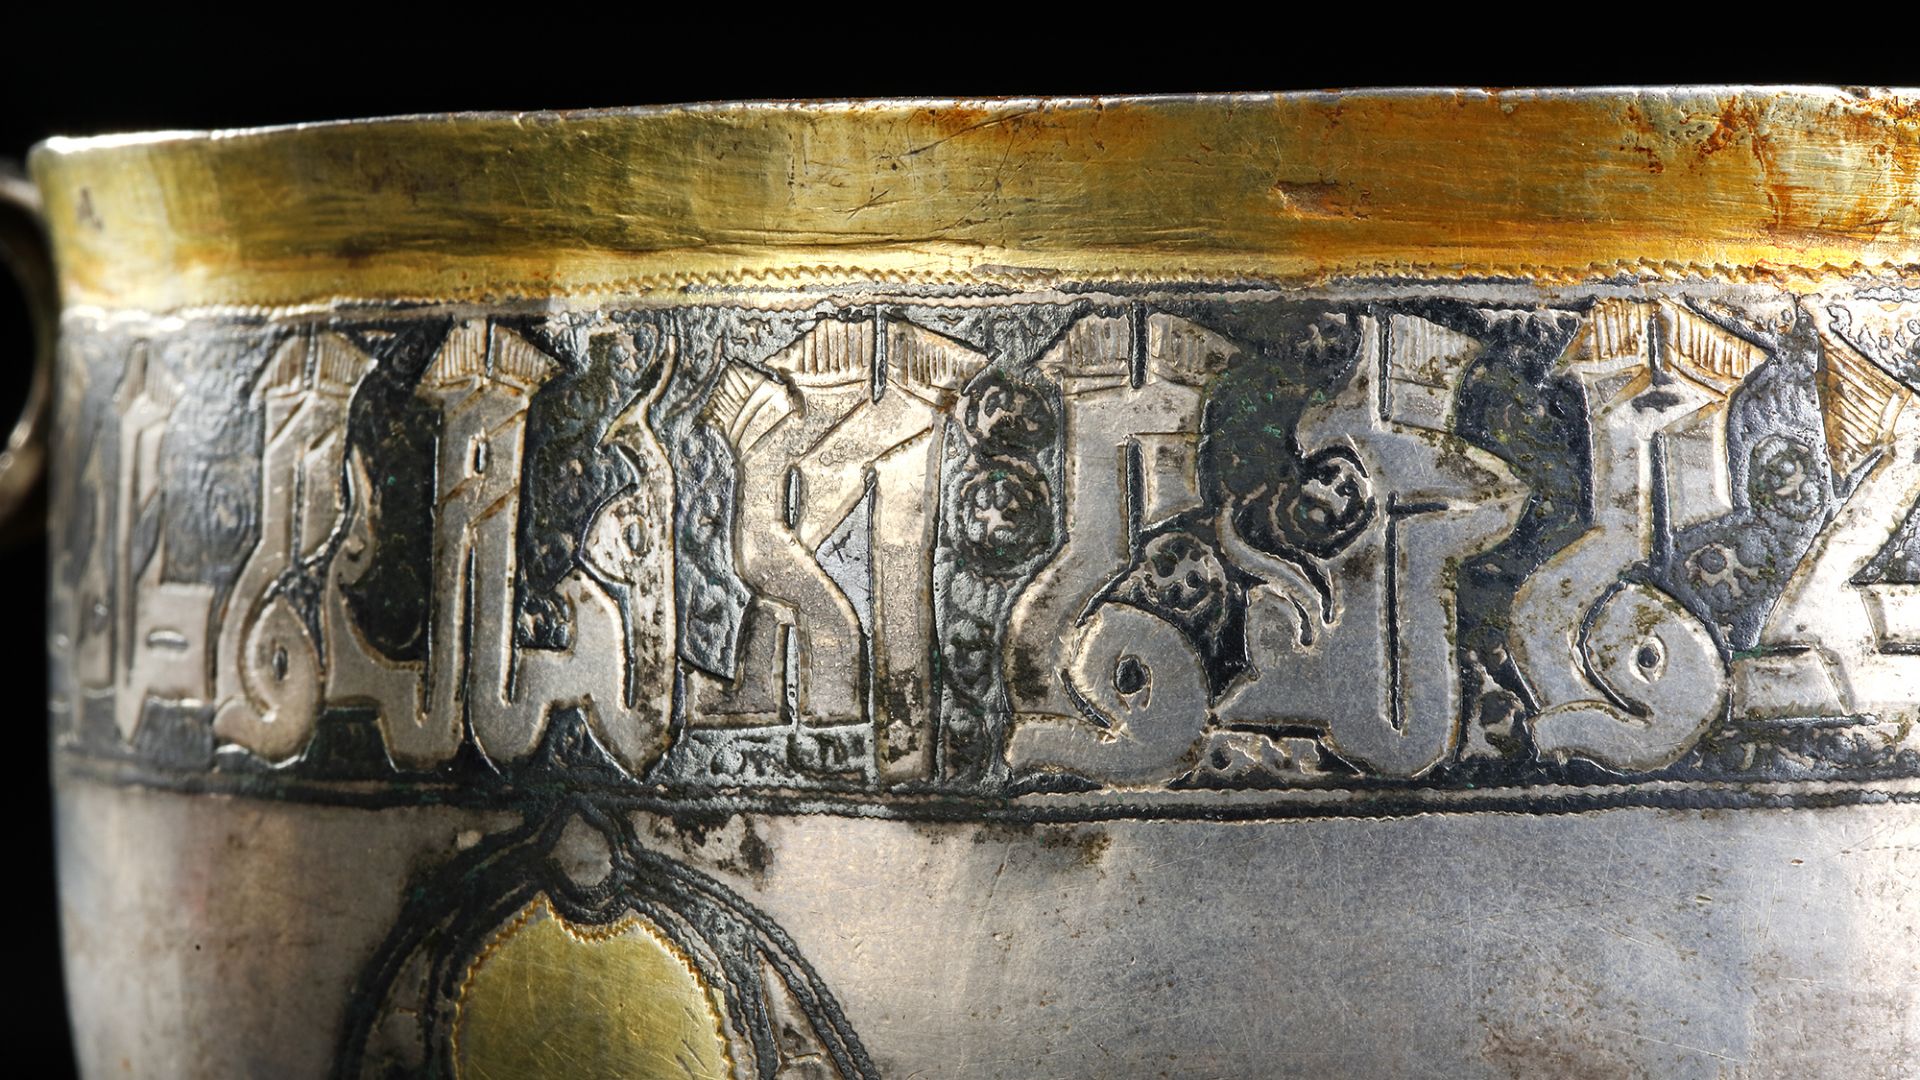 A RARE SILVER AND NIELLOED CUP WITH KUFIC INSCRIPTION, PERSIA OR CENTRAL ASIA, 11TH-12TH CENTURY - Image 31 of 34